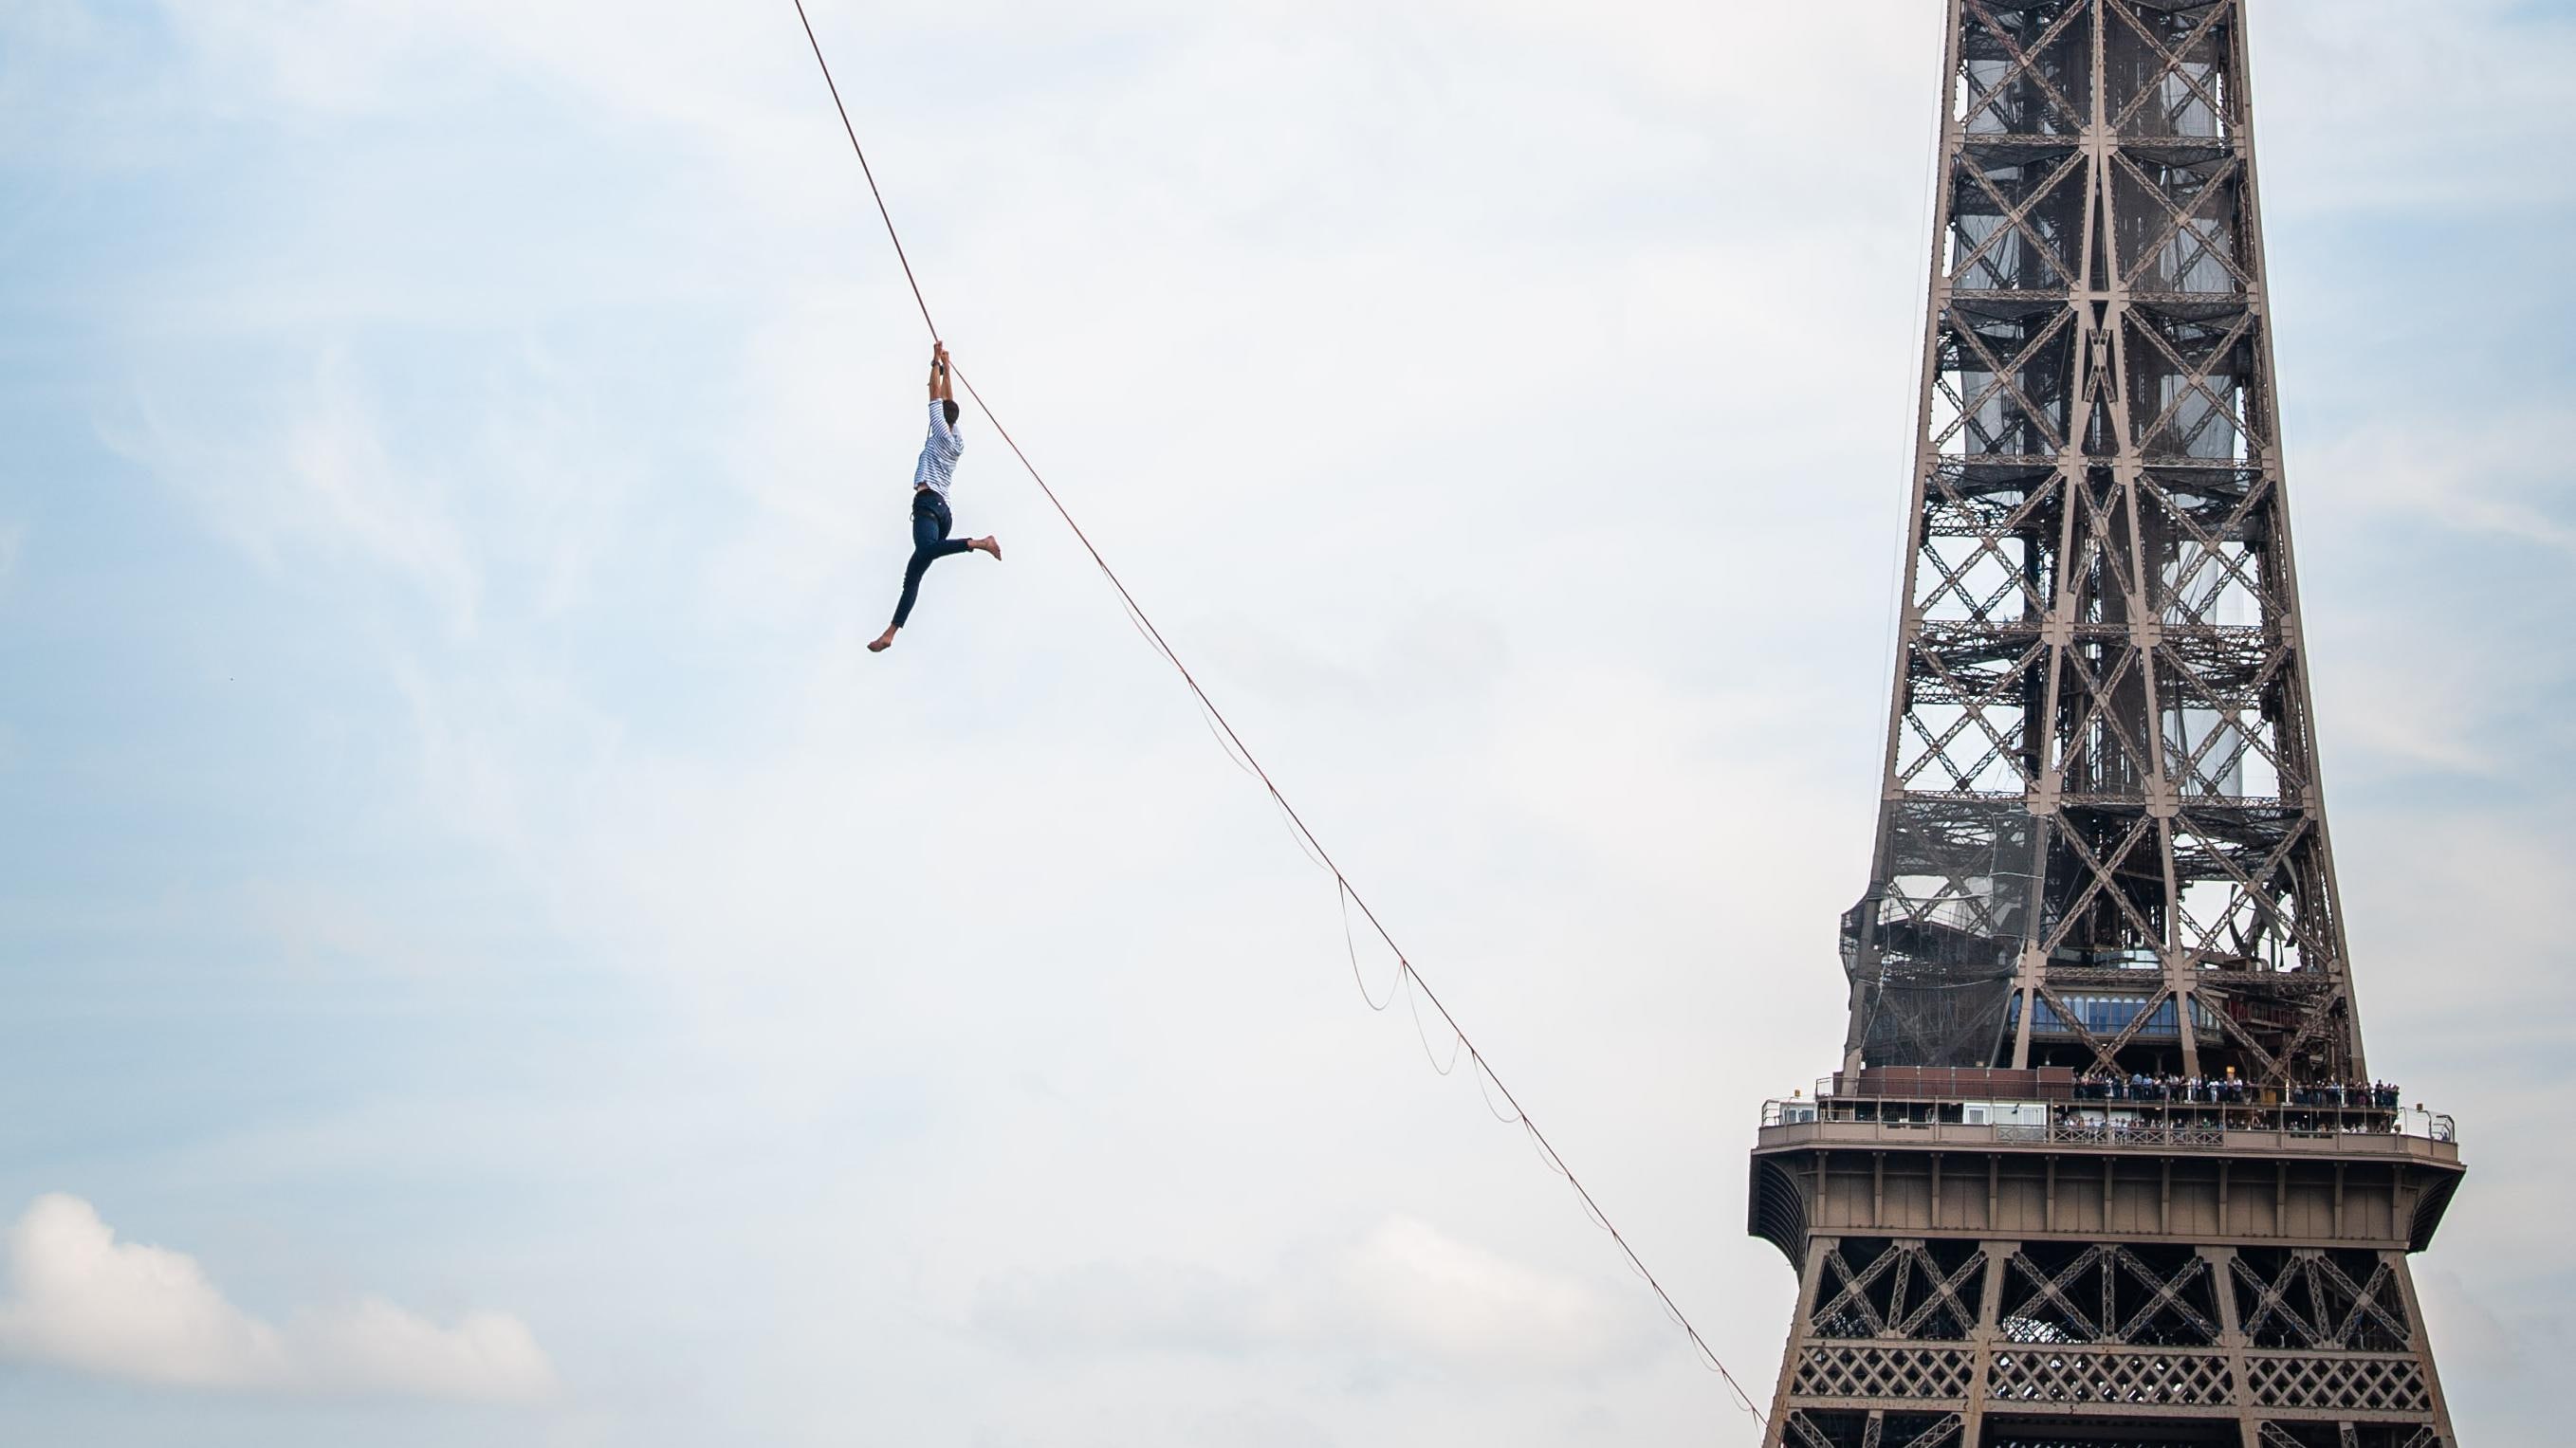 A tightrope walker hanging on a tightrope, next to the Eiffel Tower